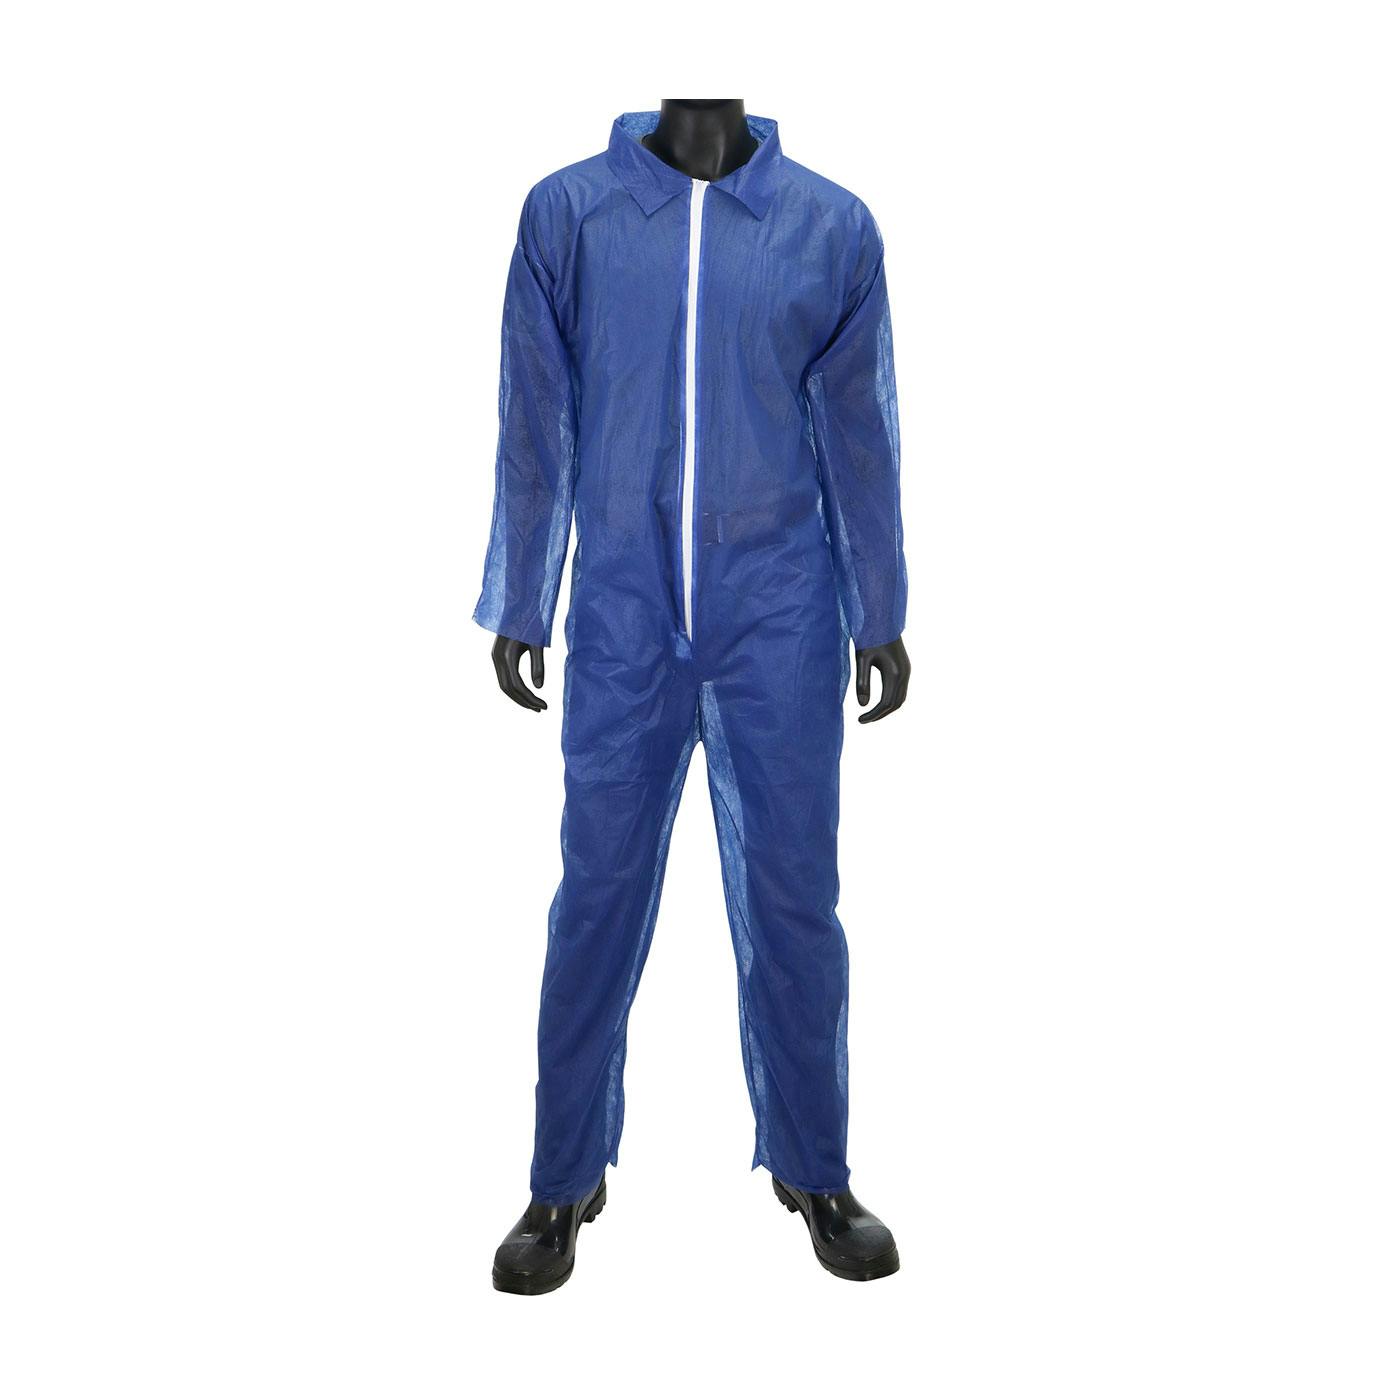 SBP Navy Basic Coverall 20GSM, Blue (3575)_0